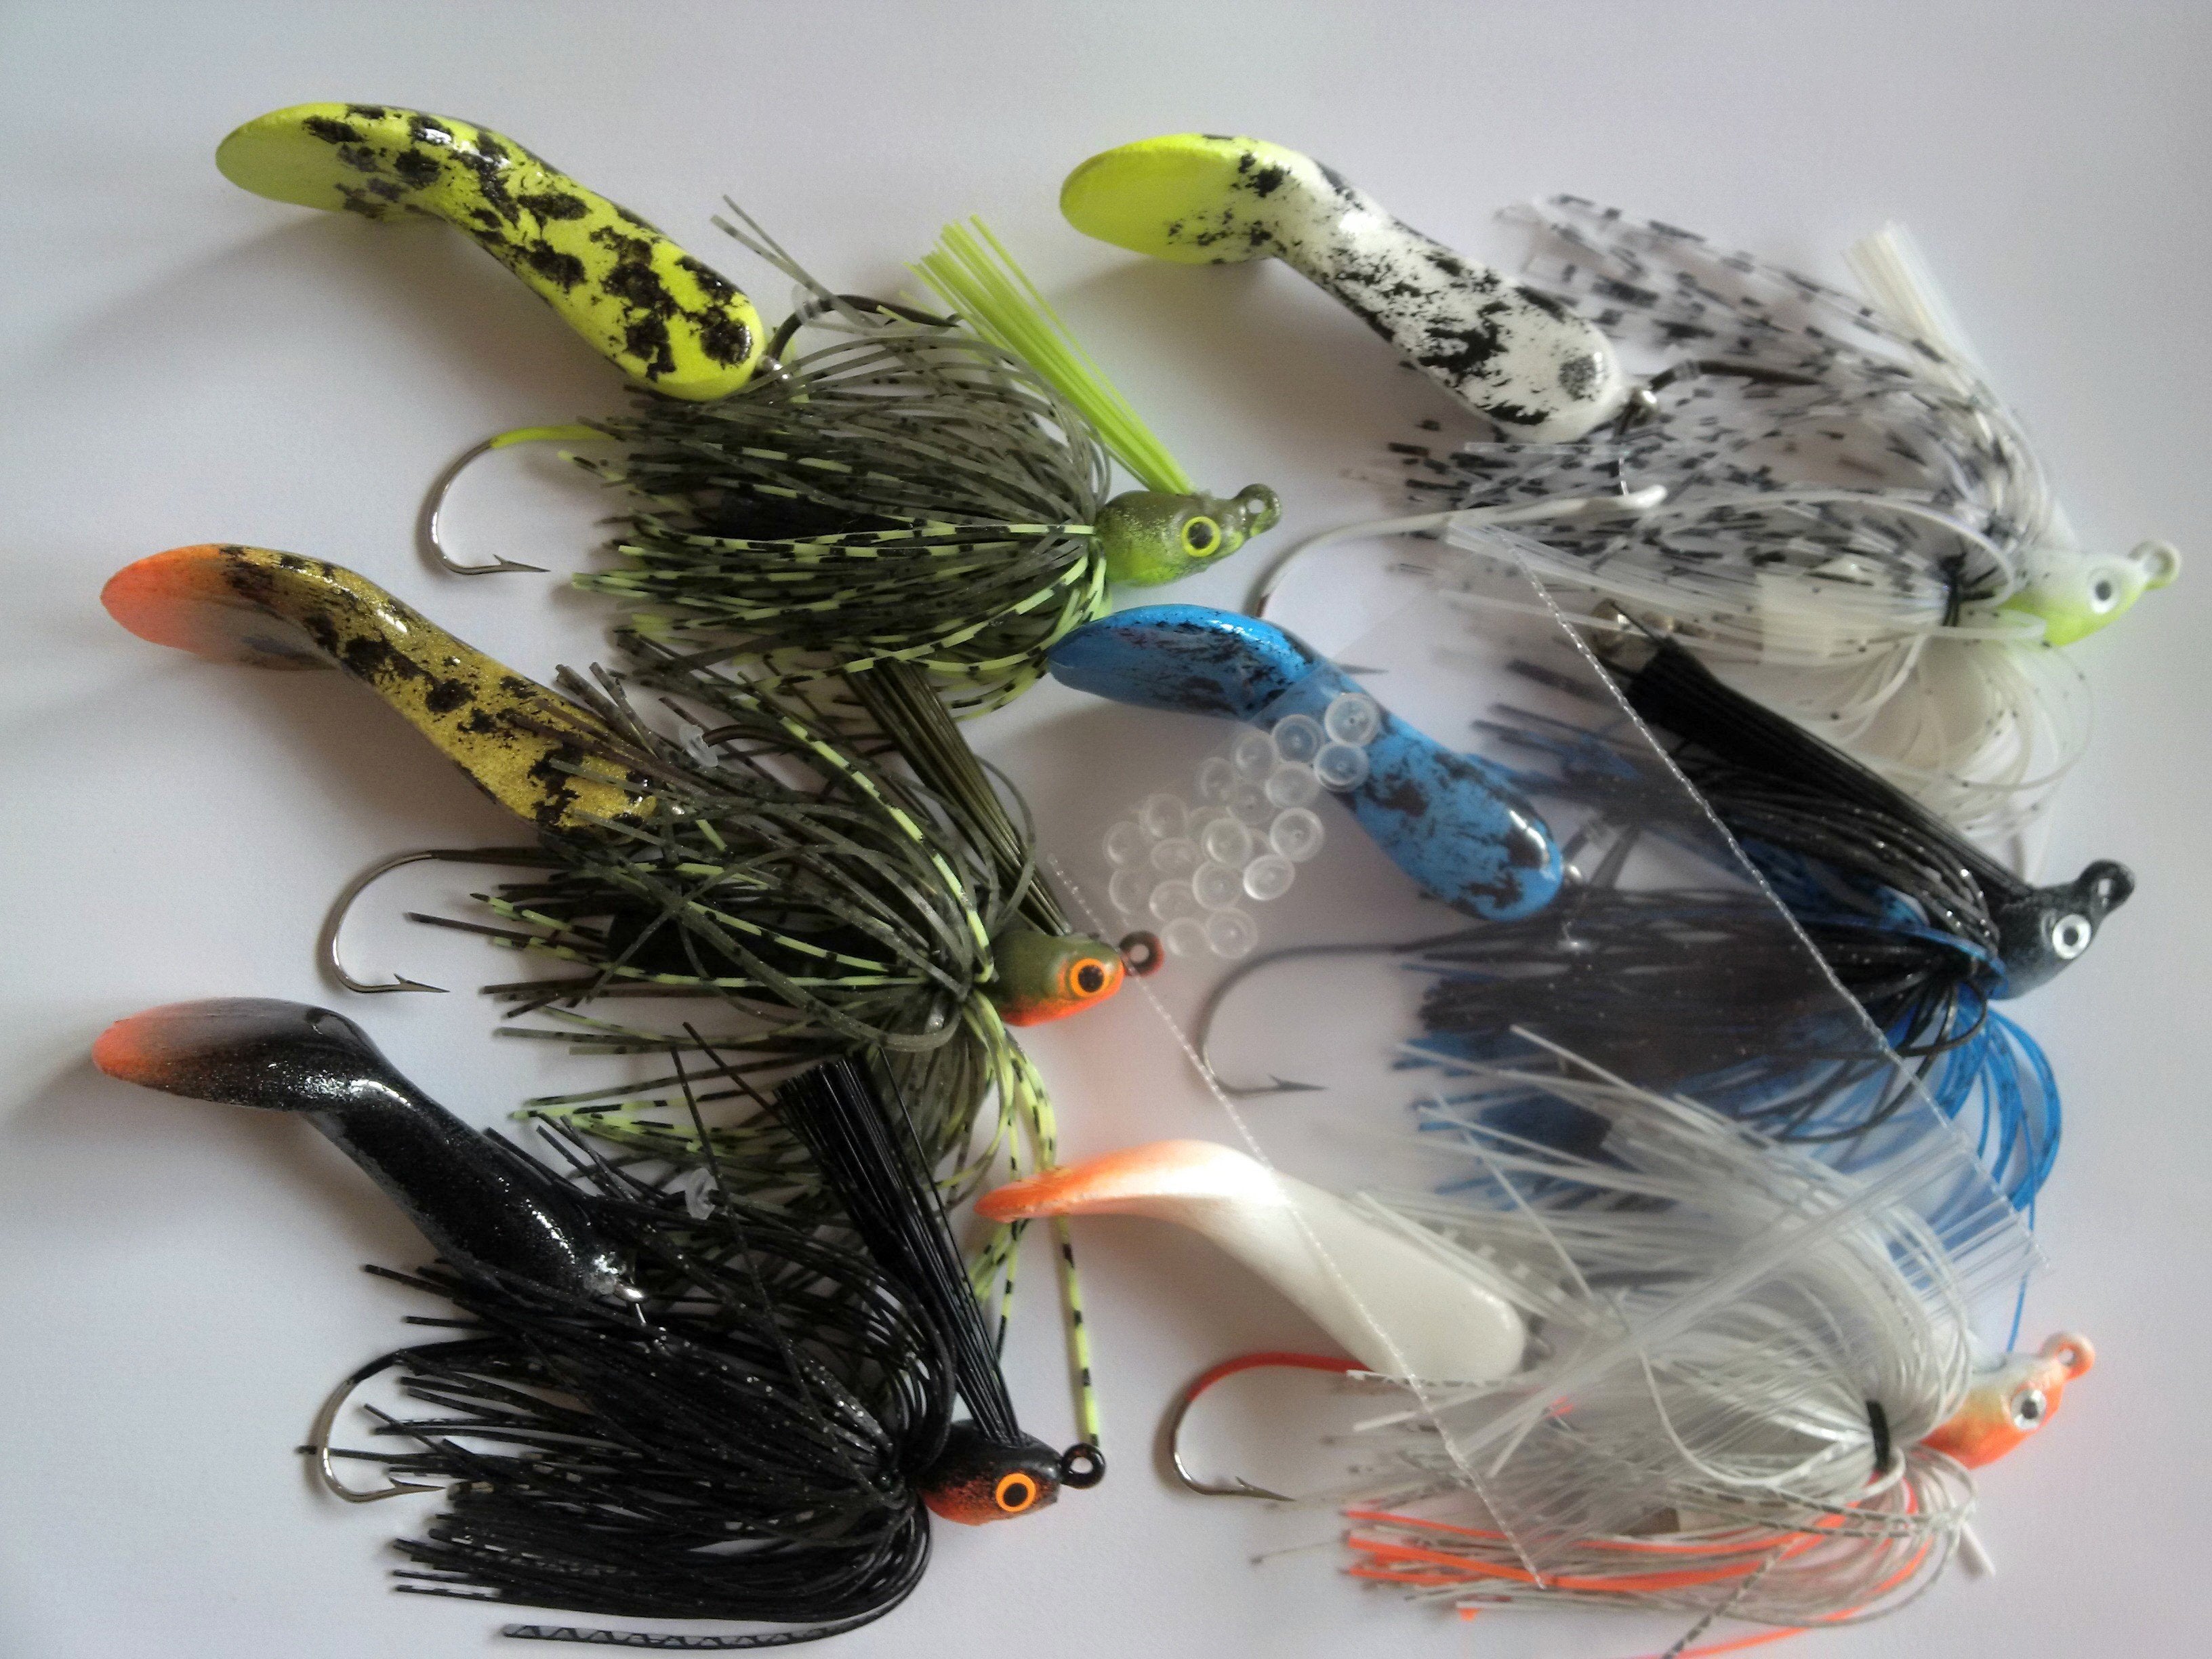 The best new bass lure for 2019 - Waggerbait™ swim jig – The Ugly